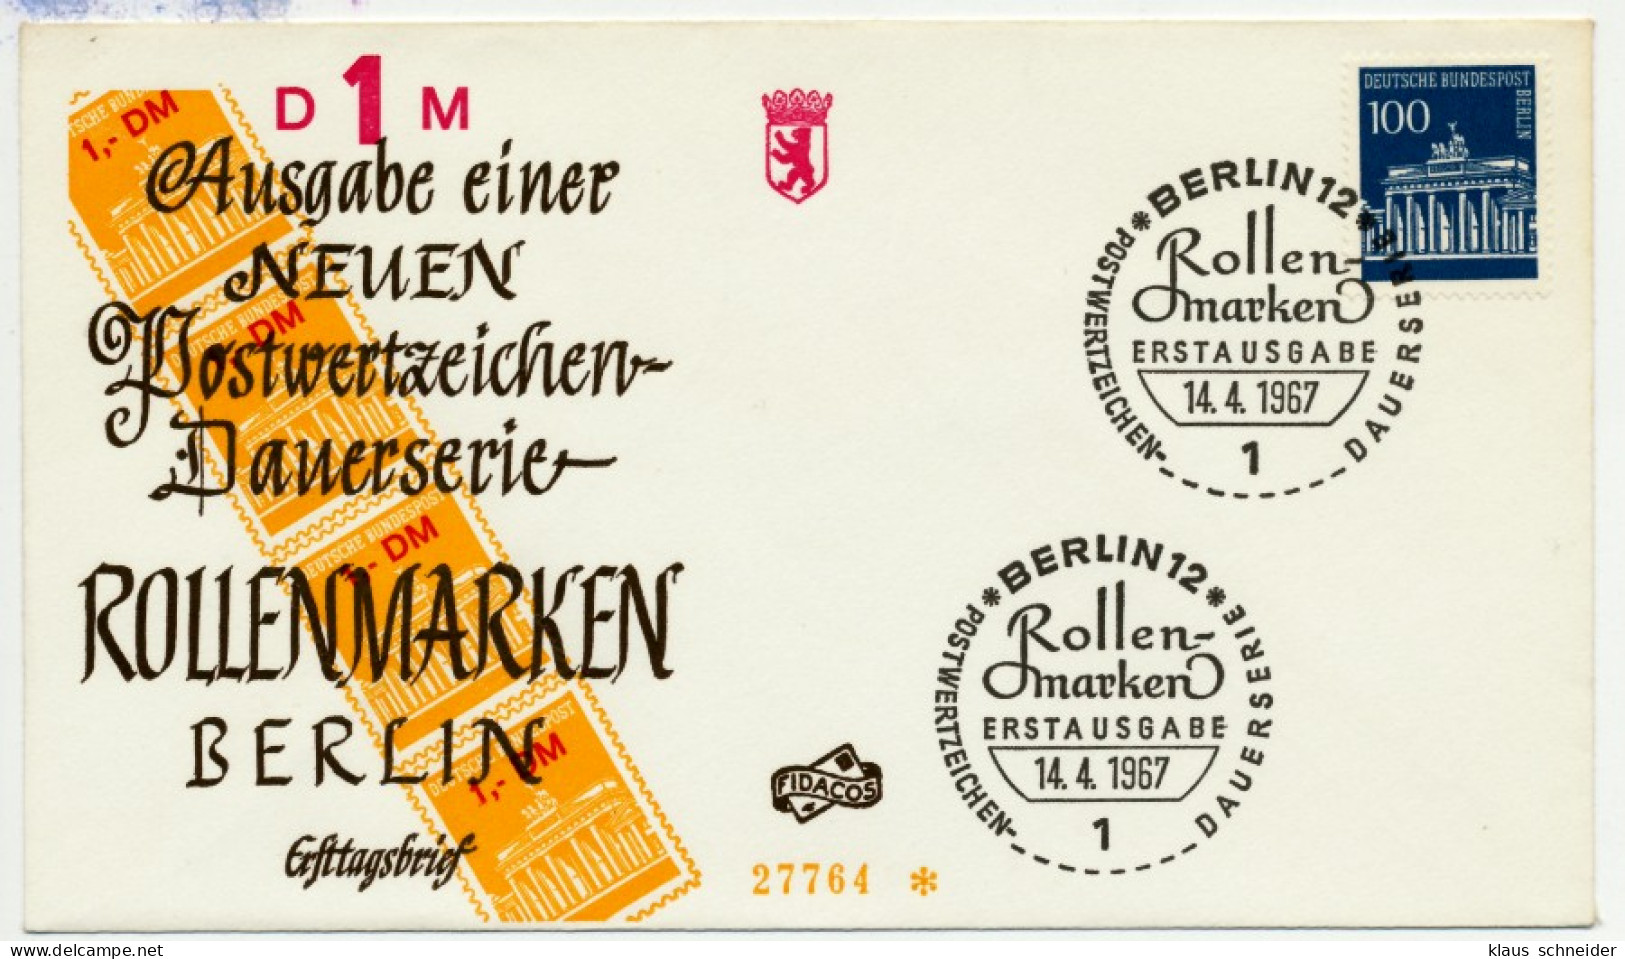 BERLIN DS BRAND. TOR Nr 290 BRIEF FDC X736846 - Covers & Documents